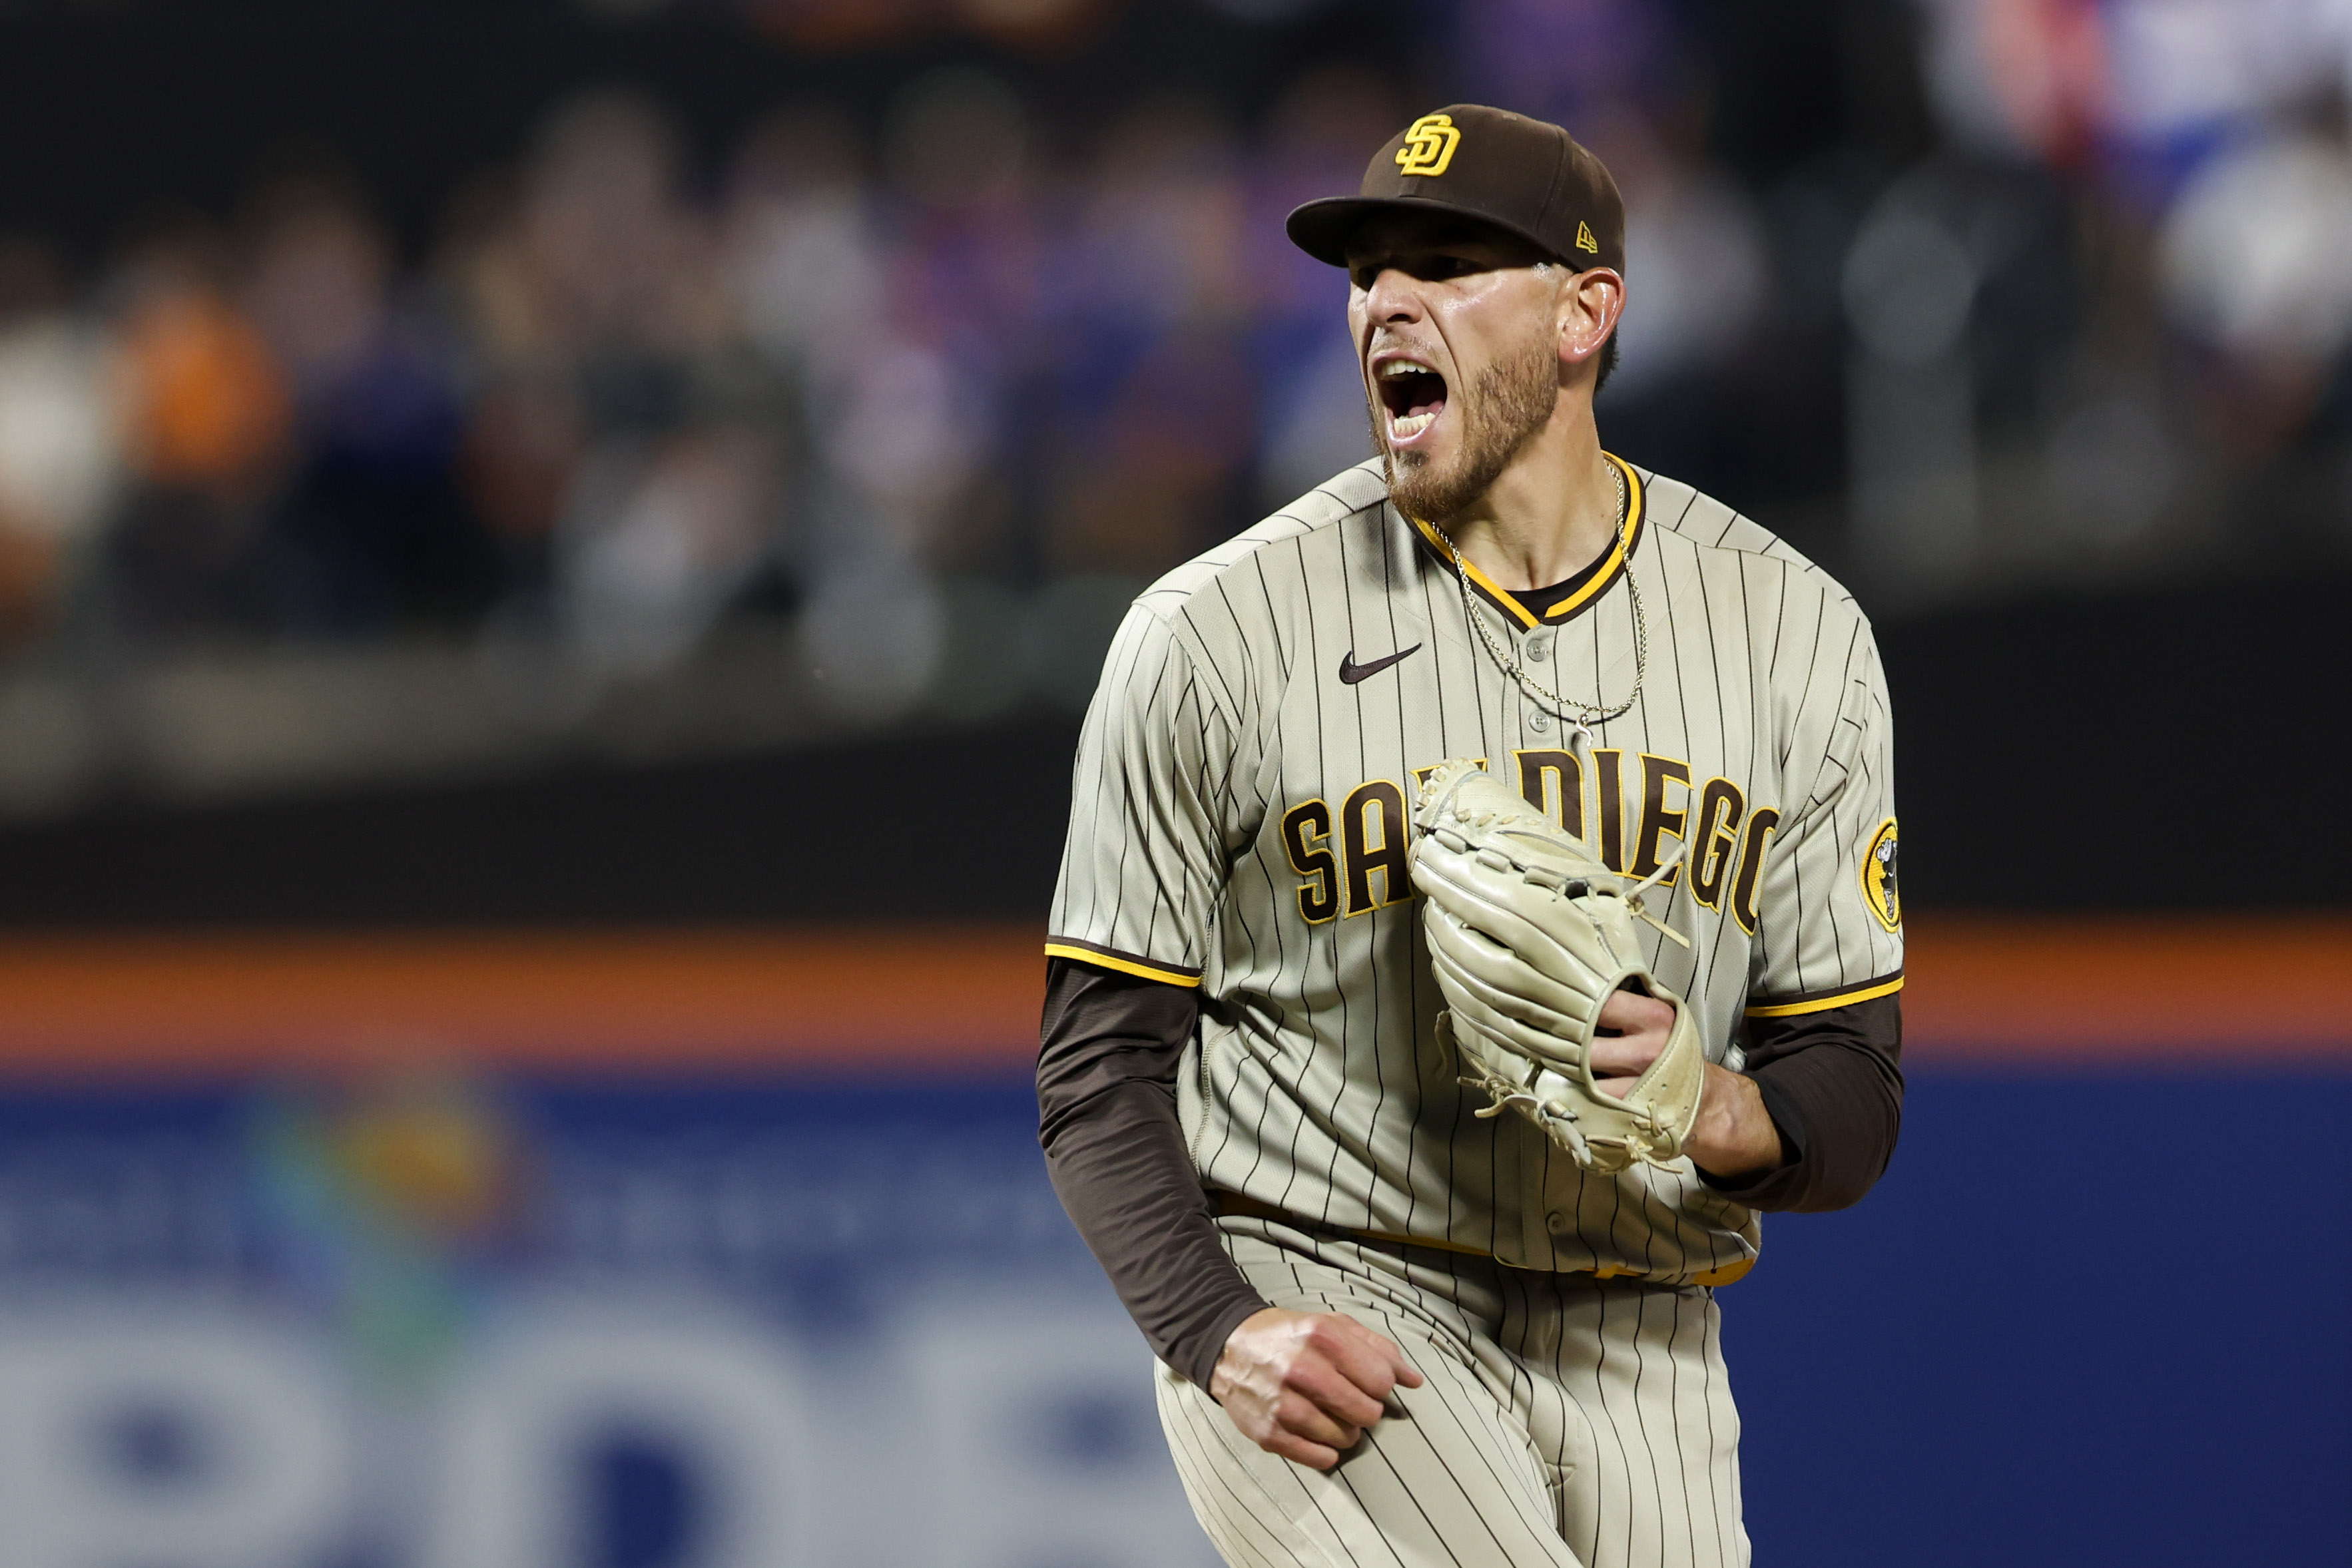 Padres Look to Musgrove in Another Closeout Game, This Time to